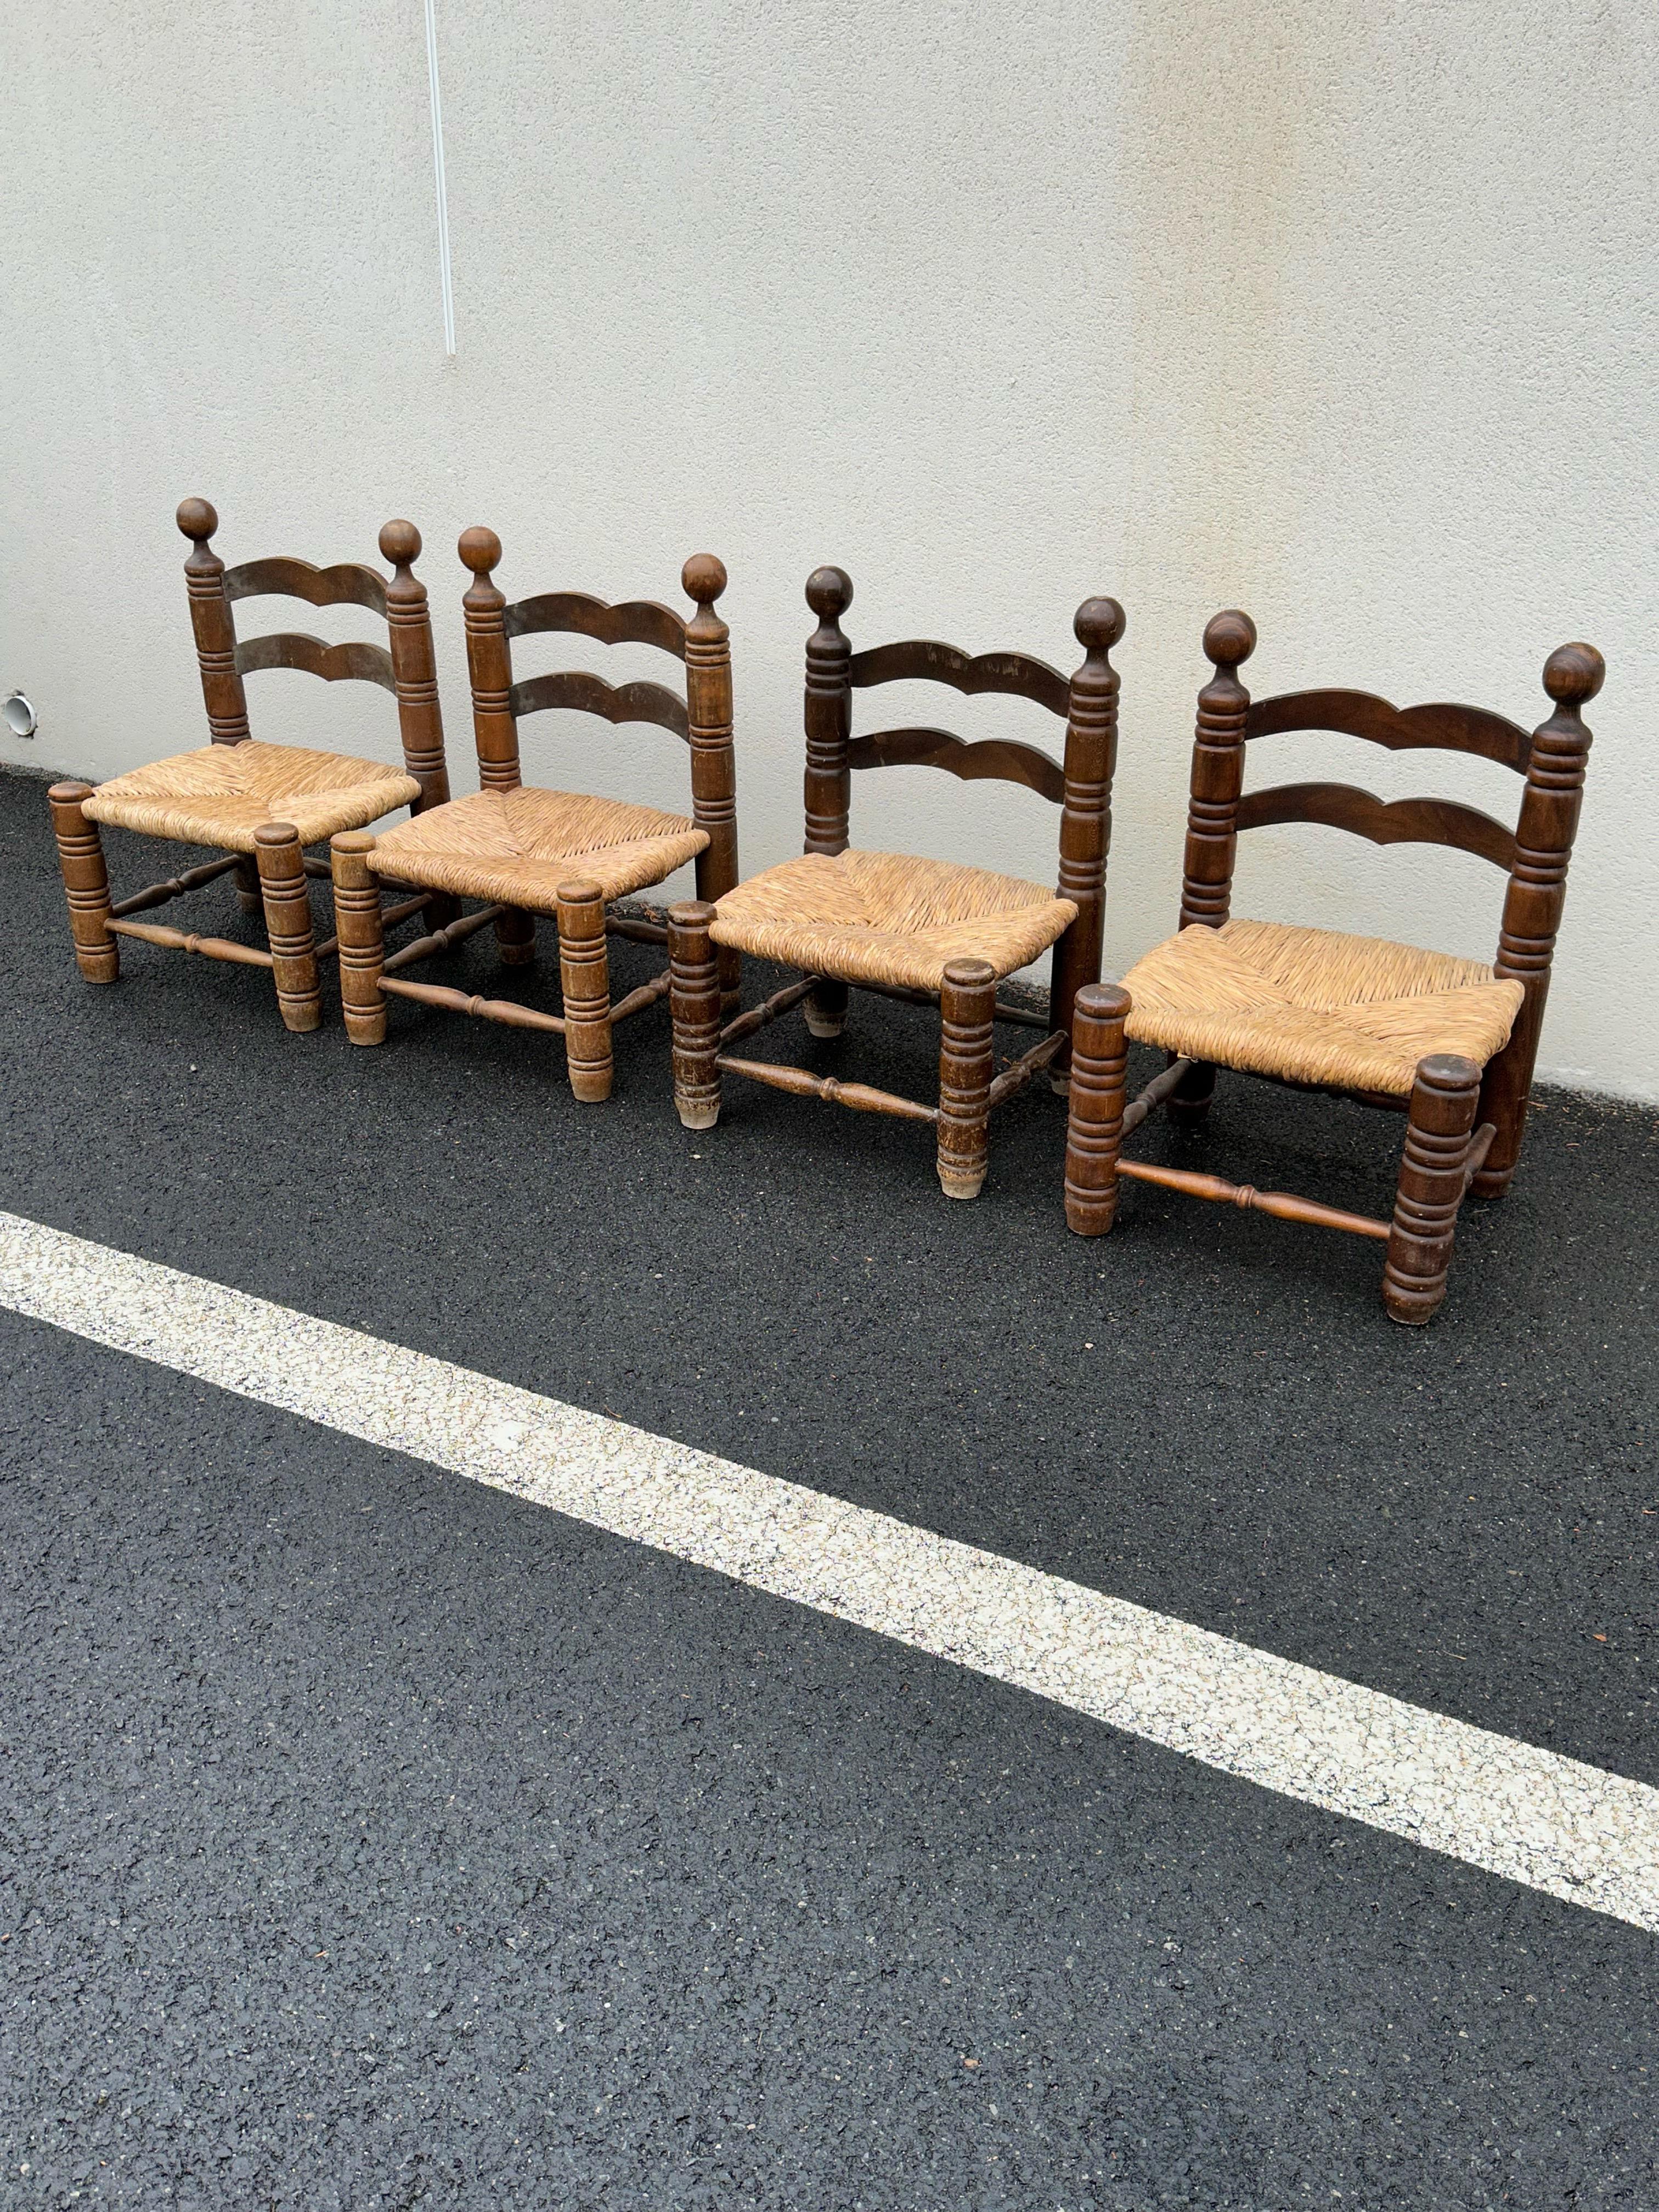 4 French design armchairs.

These armchairs were designed by designer Charles Dudouyt in the 1930s. They are made up of a solid oak structure and a seat in woven rye straw. The wood has a beautiful patina of time. 

French rustic chic.

Straw is a